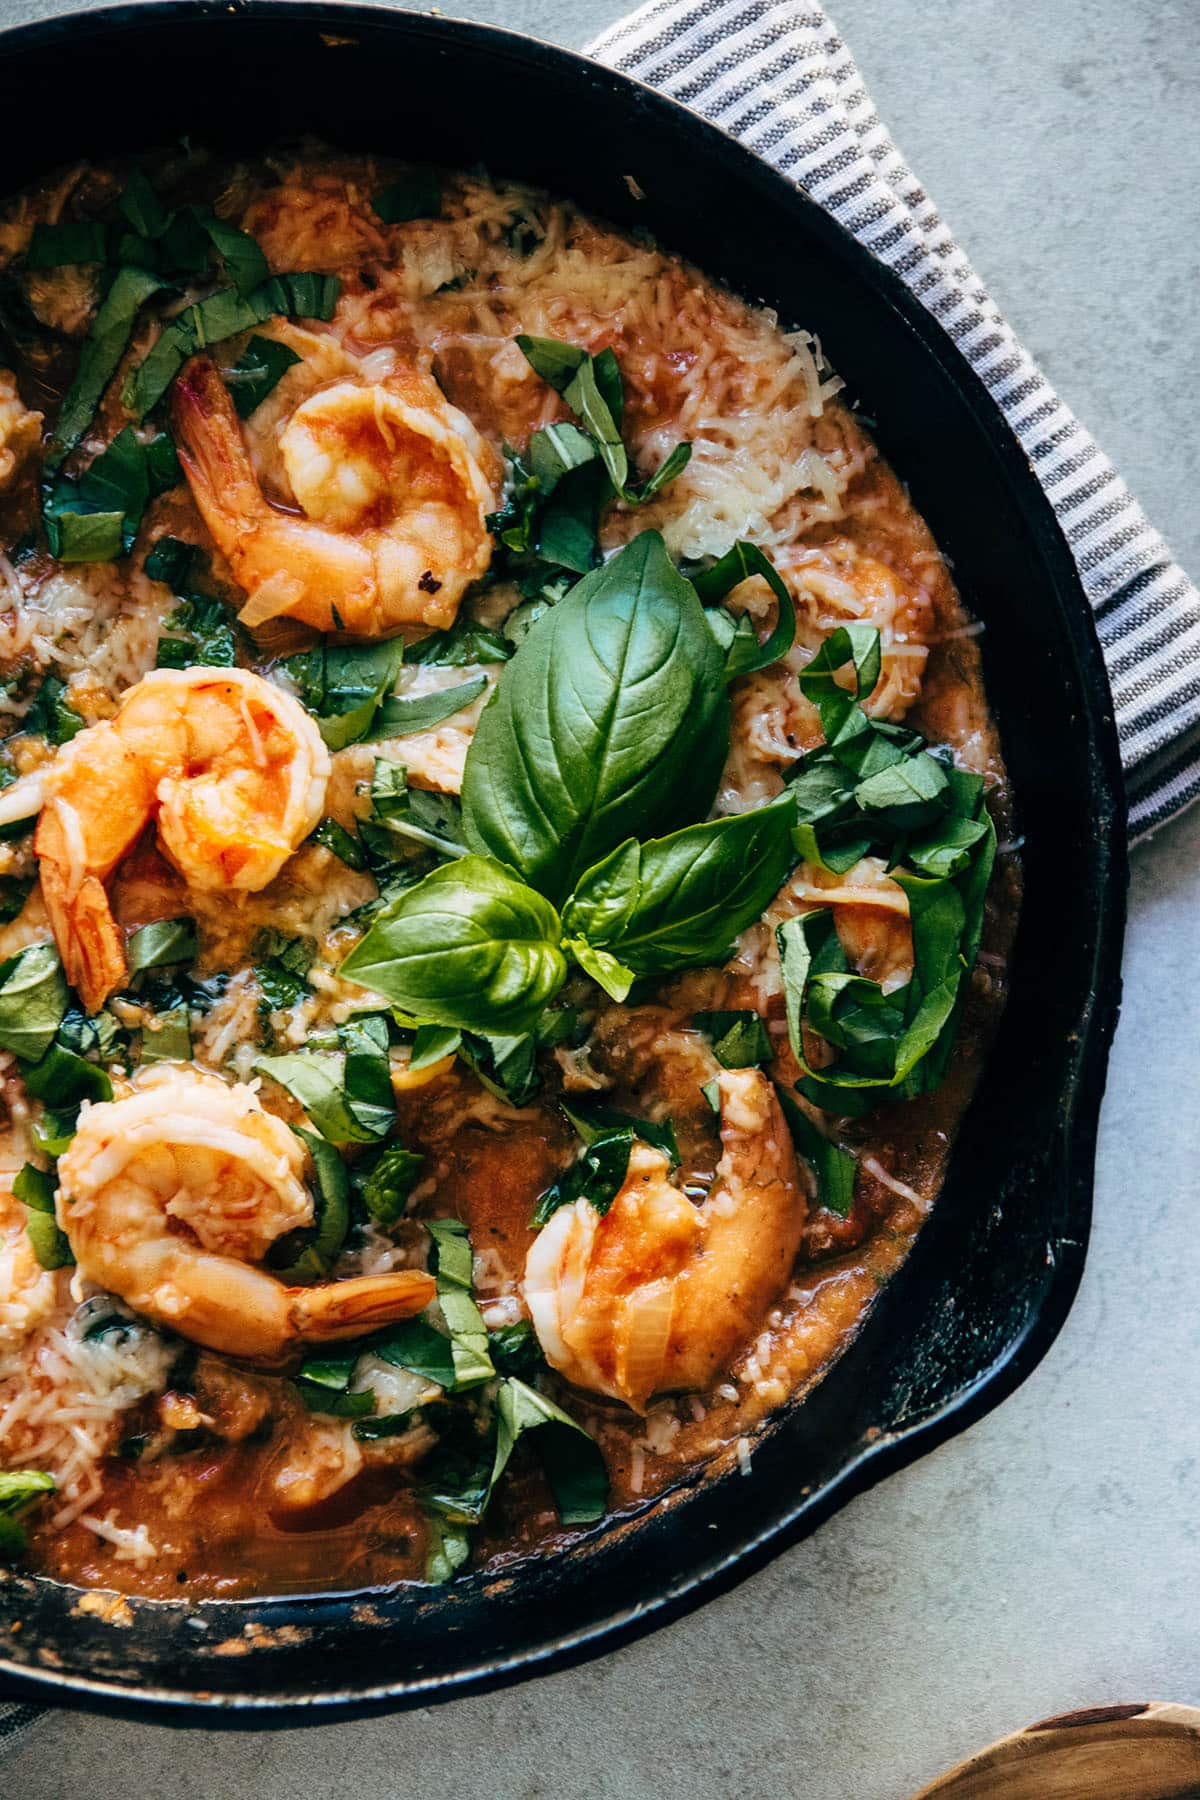 Shrimp and tomato sauce in a large cast iron skillet.